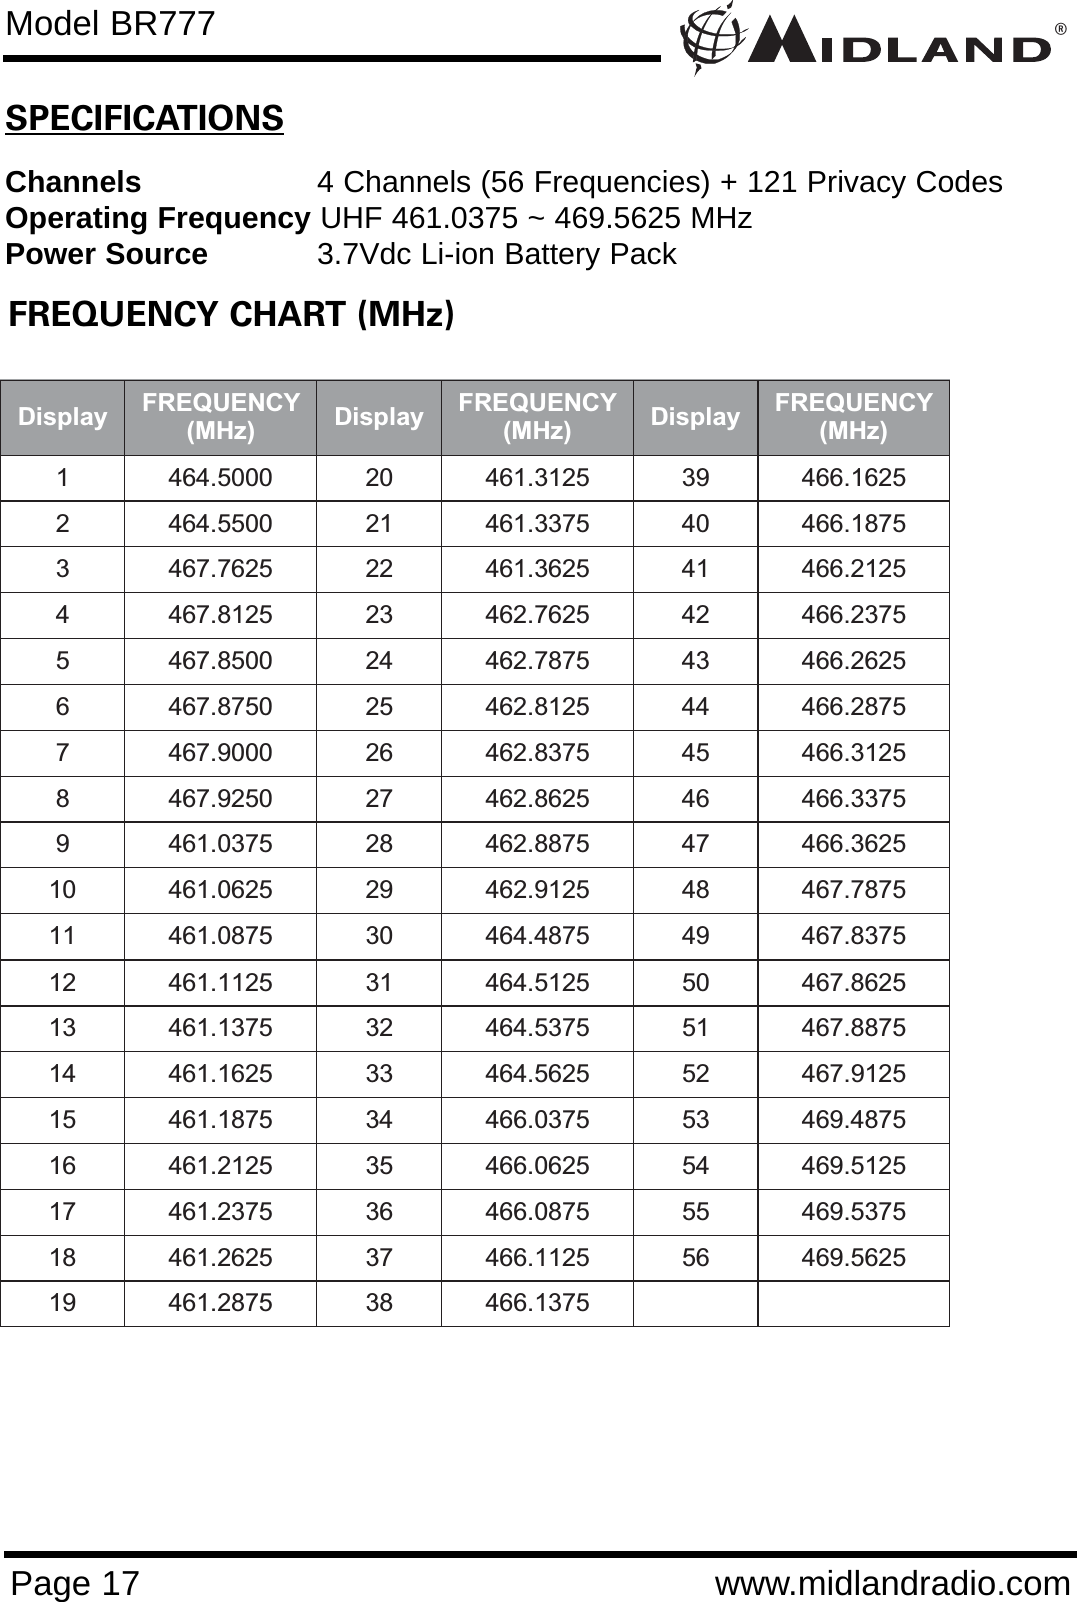 ®Page 17 www.midlandradio.comSPECIFICATIONSChannels 4 Channels (56 Frequencies) + 121 Privacy CodesOperating Frequency UHF 461.0375 ~ 469.5625 MHzPower Source 3.7Vdc Li-ion Battery PackFREQUENCY CHART (MHz)Model BR777Display FREQUENCY (MHz) Display FREQUENCY (MHz) Display FREQUENCY (MHz) 1 464.5000 20 461.3125 39 466.1625 2 464.5500 21 461.3375 40 466.1875 3 467.7625 22 461.3625 41 466.2125 4 467.8125 23 462.7625 42 466.2375 5 467.8500 24 462.7875 43 466.2625 6 467.8750 25 462.8125 44 466.2875 7 467.9000 26 462.8375 45 466.3125 8 467.9250 27 462.8625 46 466.3375 9 461.0375 28 462.8875 47 466.3625 10 461.0625 29 462.9125 48 467.7875 11 461.0875 30 464.4875 49 467.8375 12 461.1125 31 464.5125 50 467.8625 13 461.1375 32 464.5375 51 467.8875 14 461.1625 33 464.5625 52 467.9125 15 461.1875 34 466.0375 53 469.4875 16 461.2125 35 466.0625 54 469.5125 17 461.2375 36 466.0875 55 469.5375 18 461.2625 37 466.1125 56 469.5625 19 461.2875 38 466.1375     